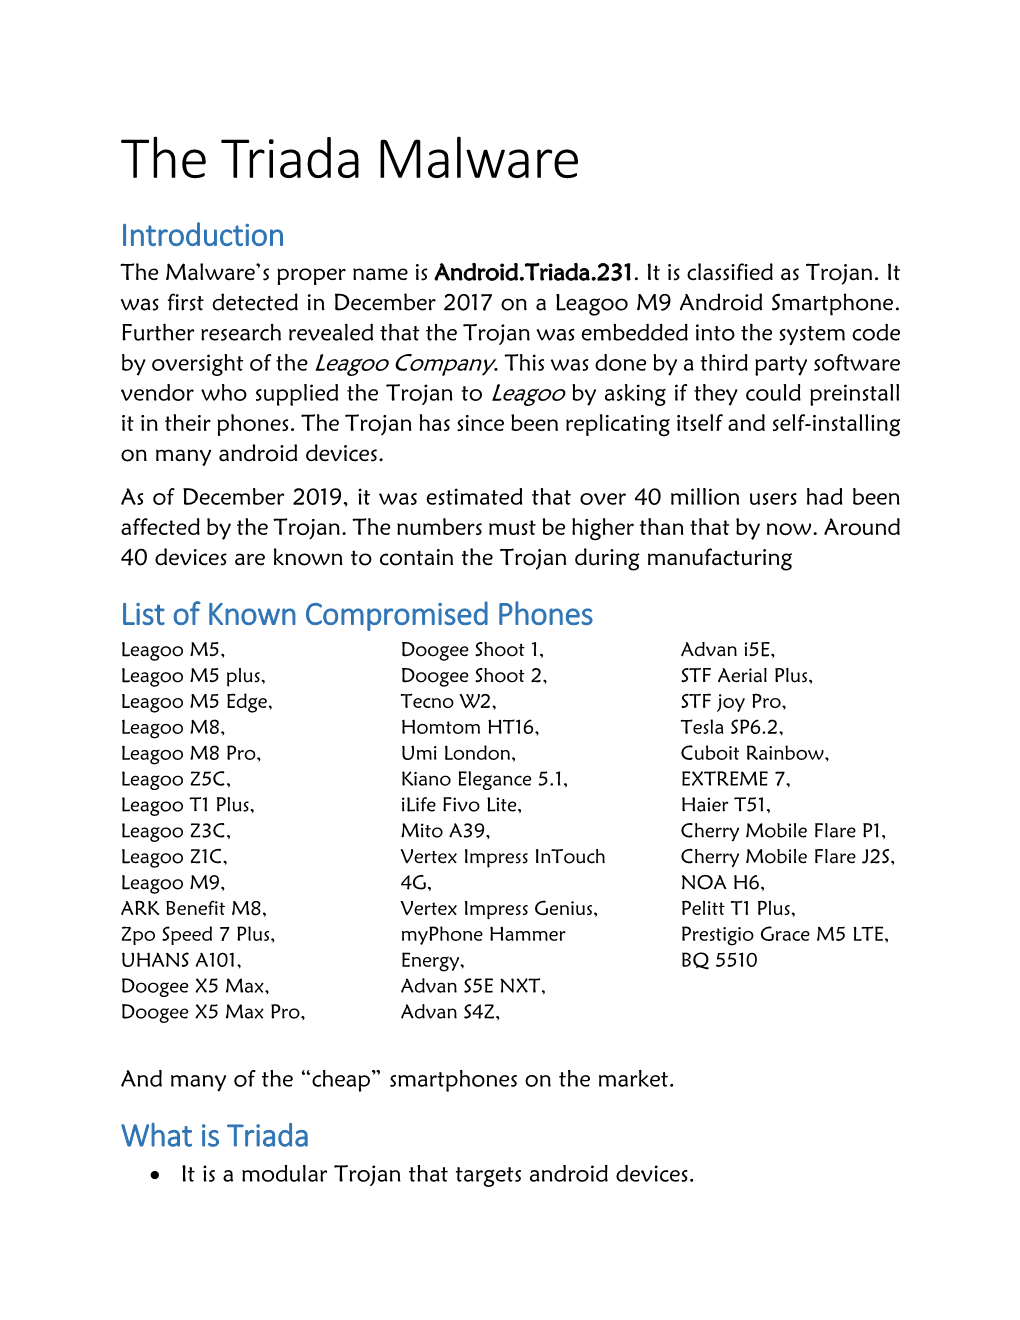 The Triada Malware Introduction the Malware’S Proper Name Is Android.Triada.231